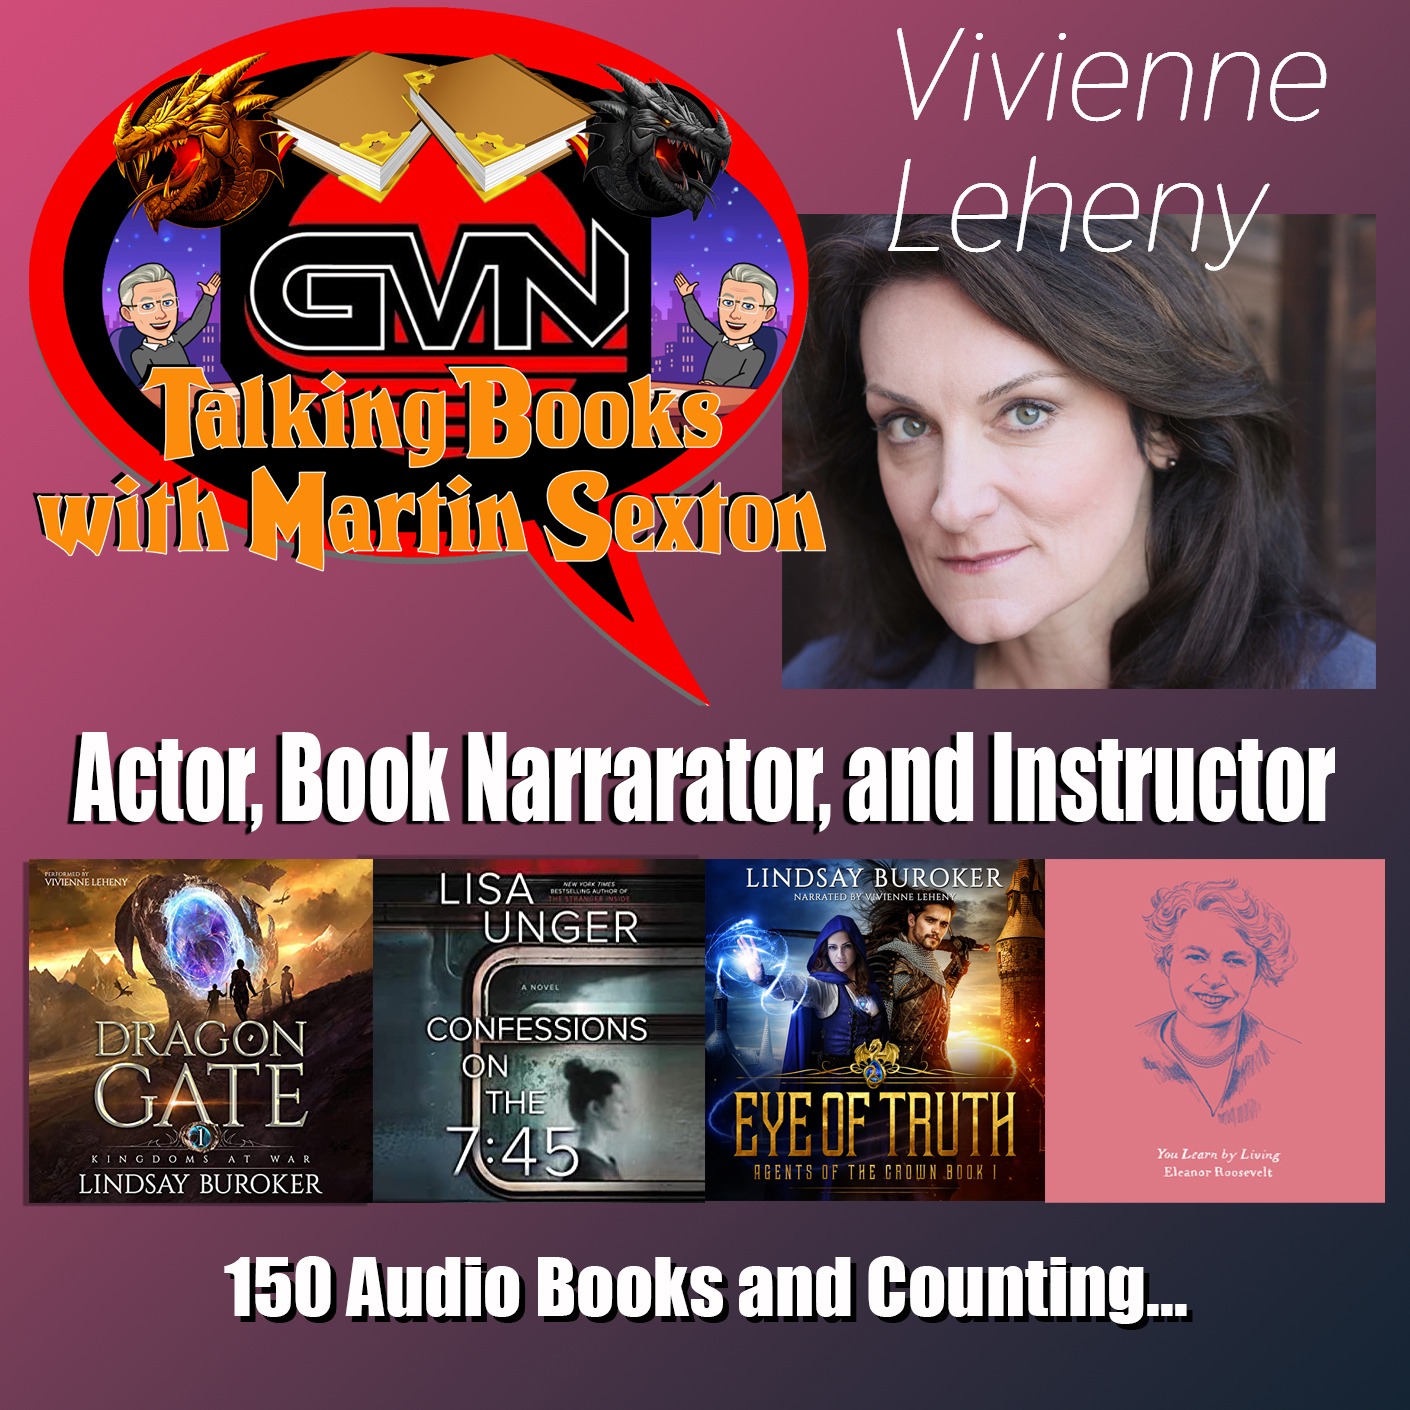 GVN Talking Comics Interview With Voiceover Actress Vivienne Leheny